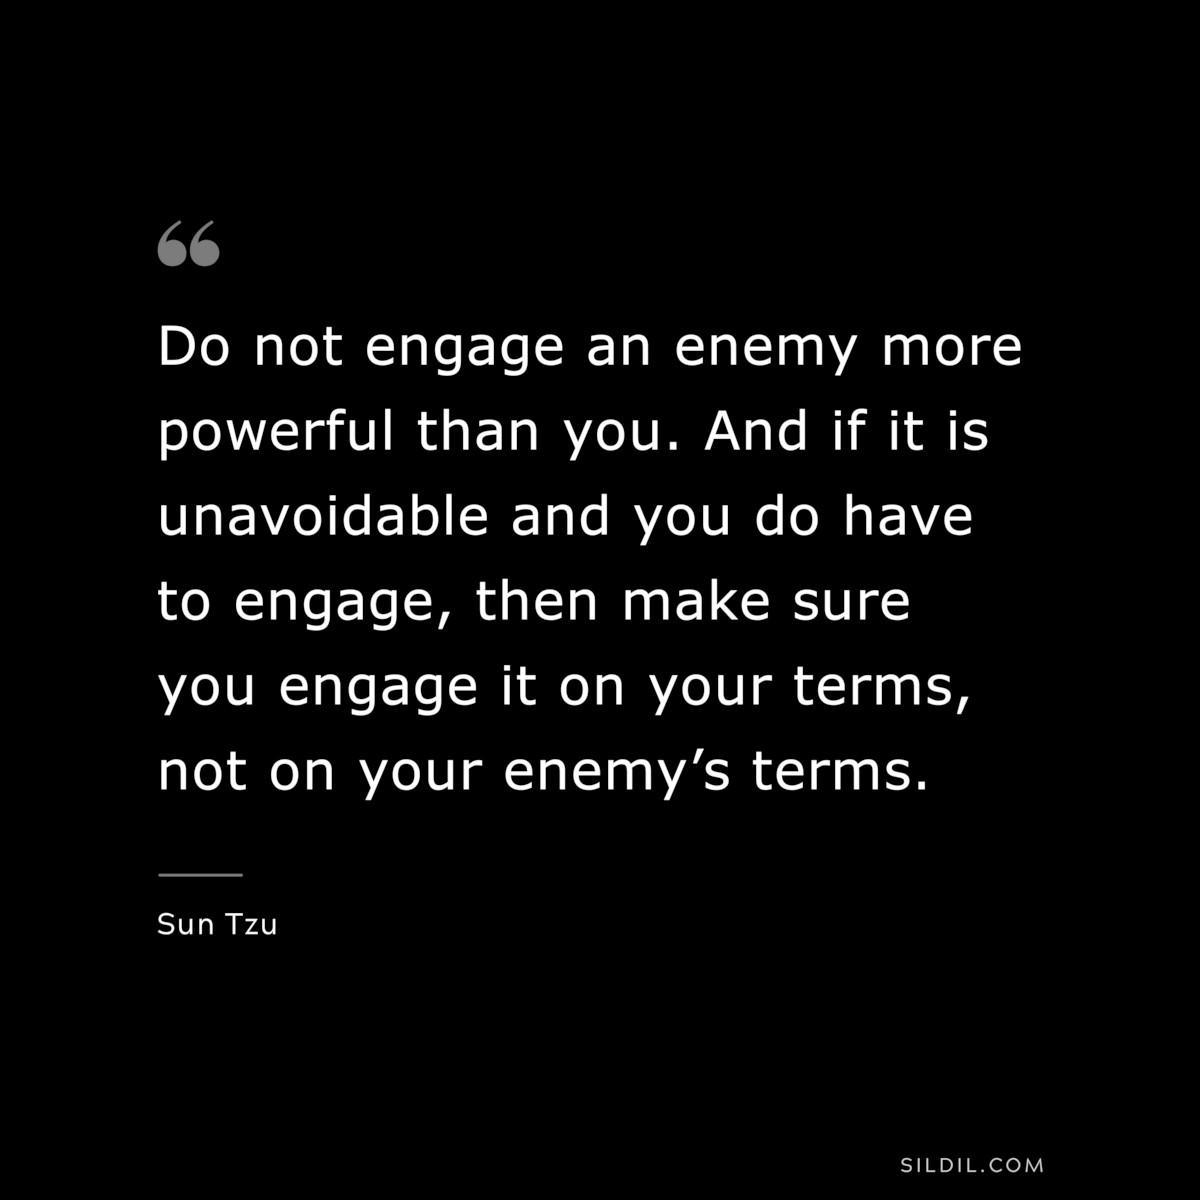 Do not engage an enemy more powerful than you. And if it is unavoidable and you do have to engage, then make sure you engage it on your terms, not on your enemy’s terms.― Sun Tzu